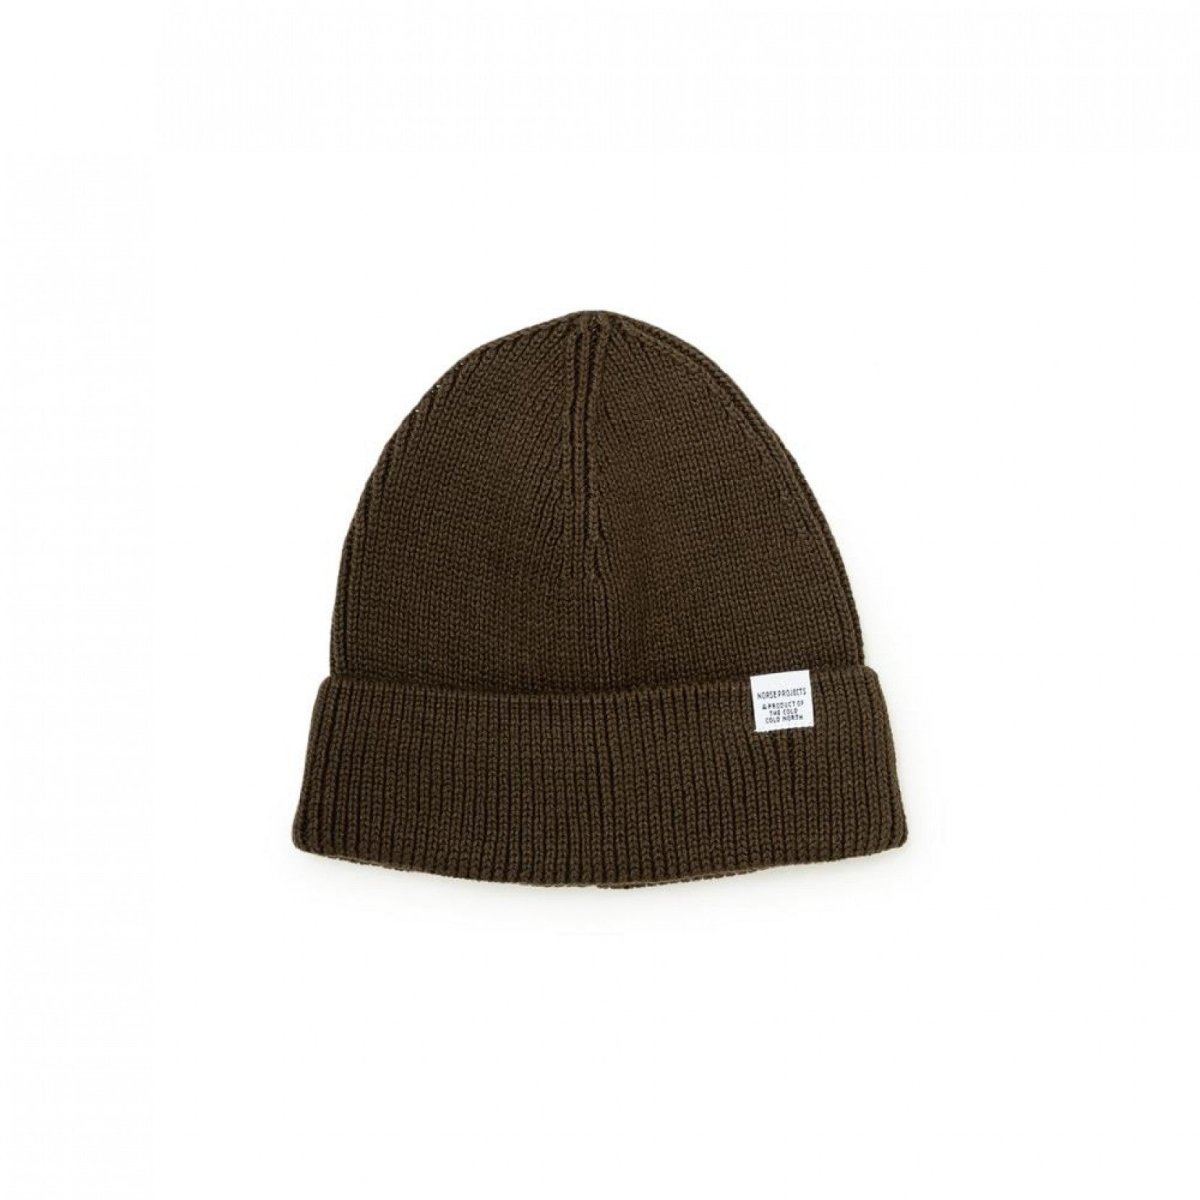 Norse Projects Short Beanie (Olivgrün)  - Allike Store